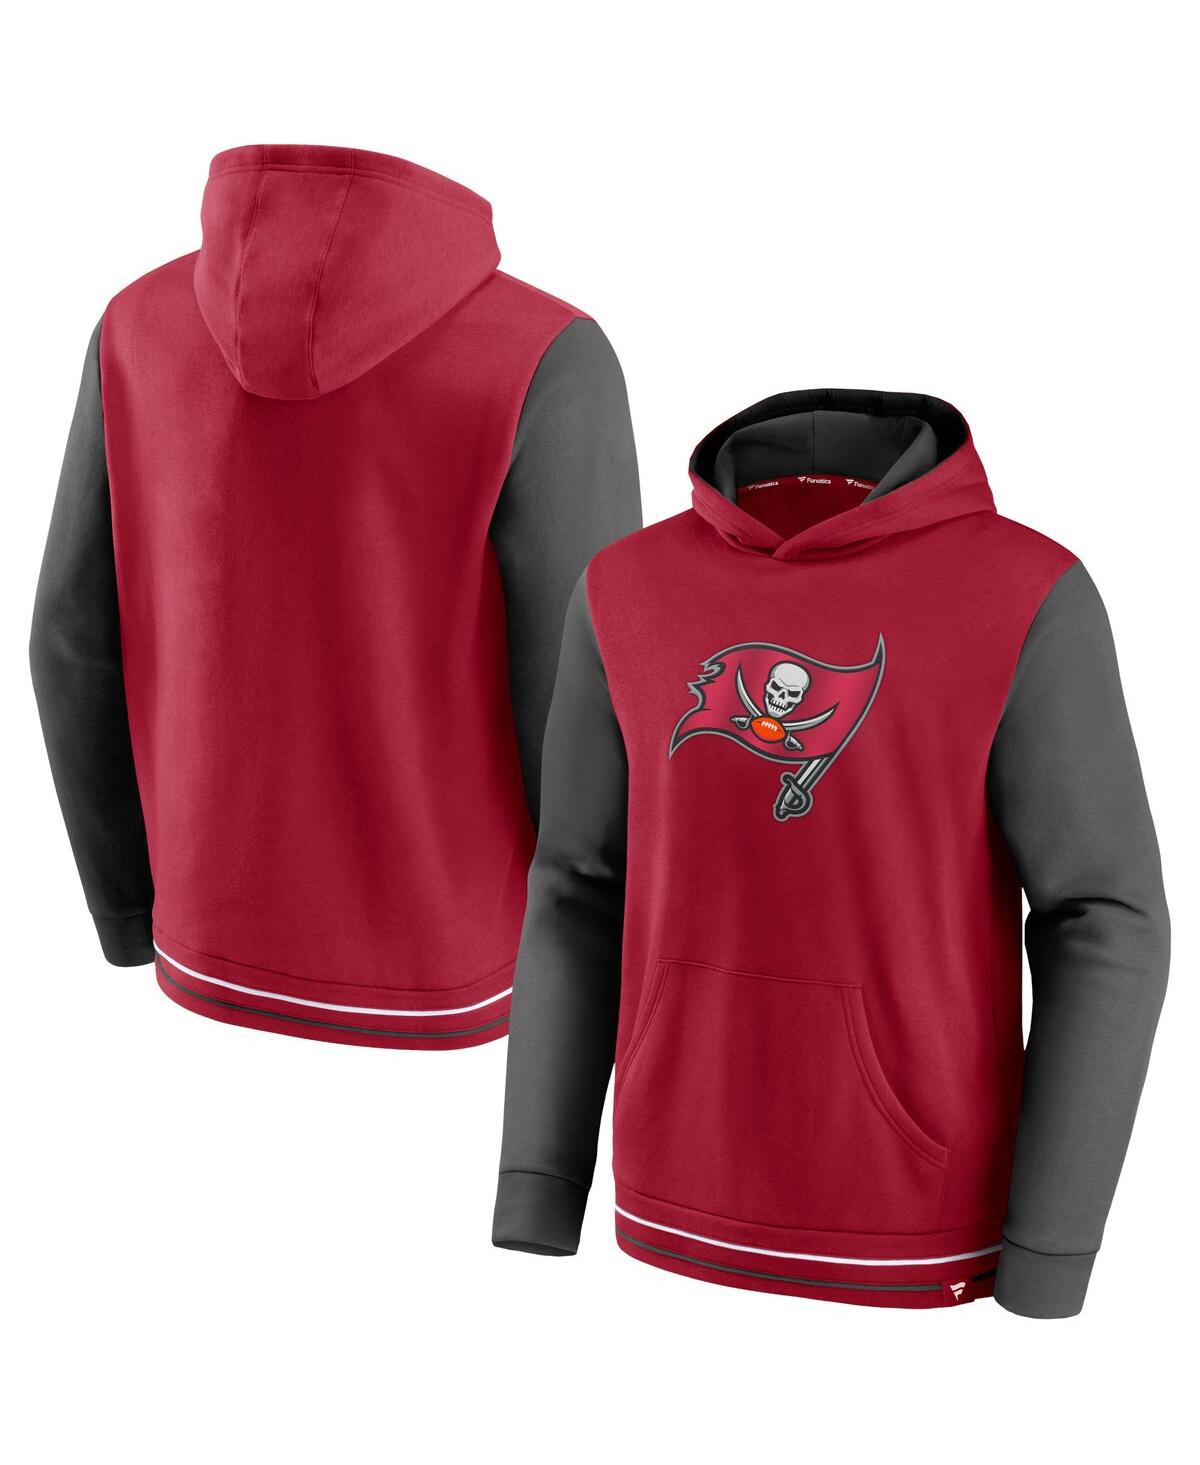 FANATICS MEN'S FANATICS BRANDED RED AND PEWTER TAMPA BAY BUCCANEERS BLOCK PARTY PULLOVER HOODIE